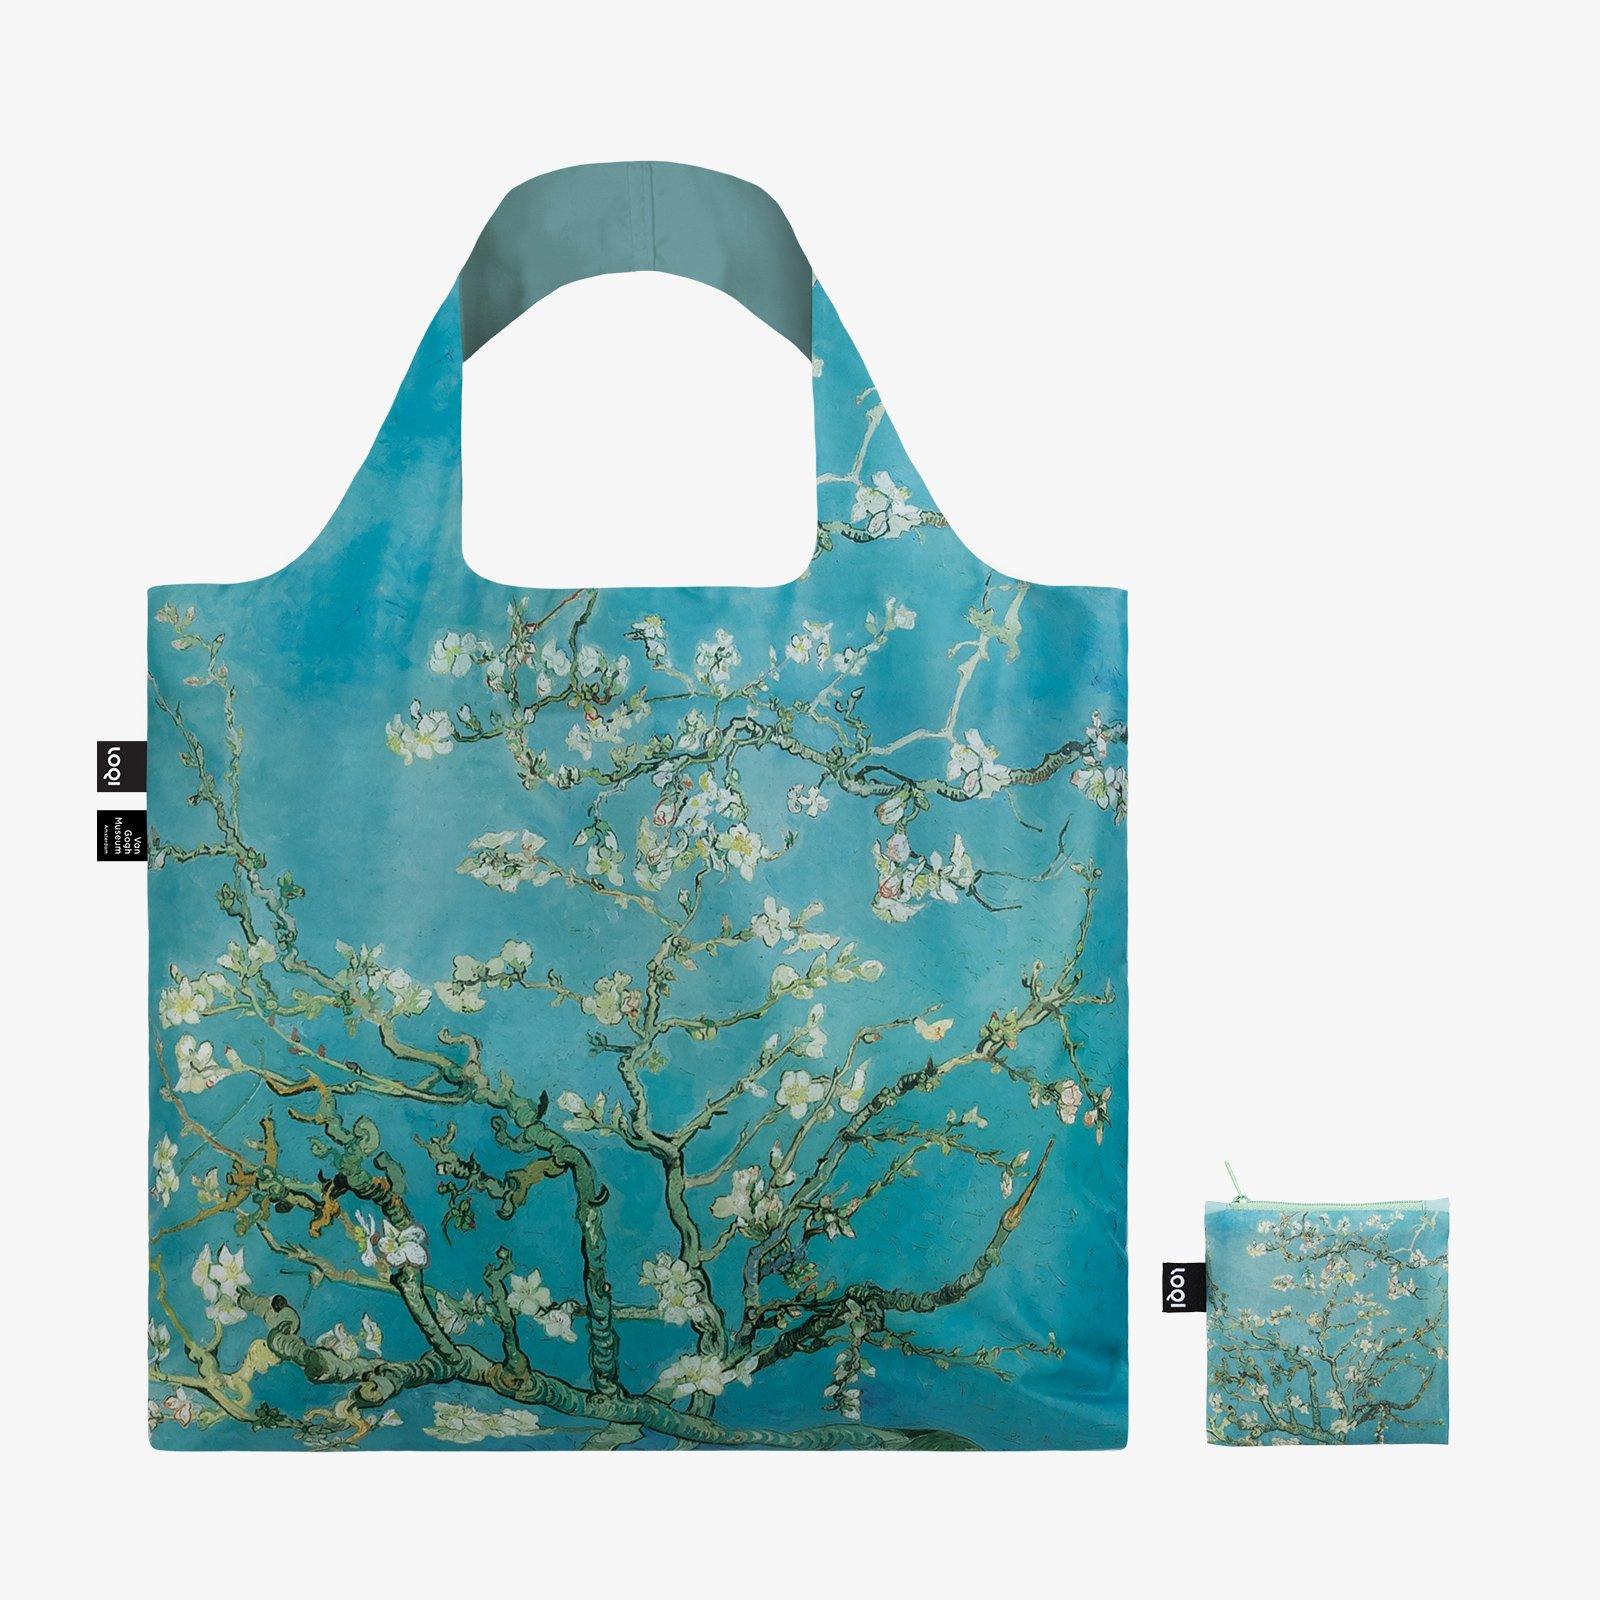 Sustainable Living Loqi Van Gogh Blossom Recycled Bag by Weirs of Baggot Street